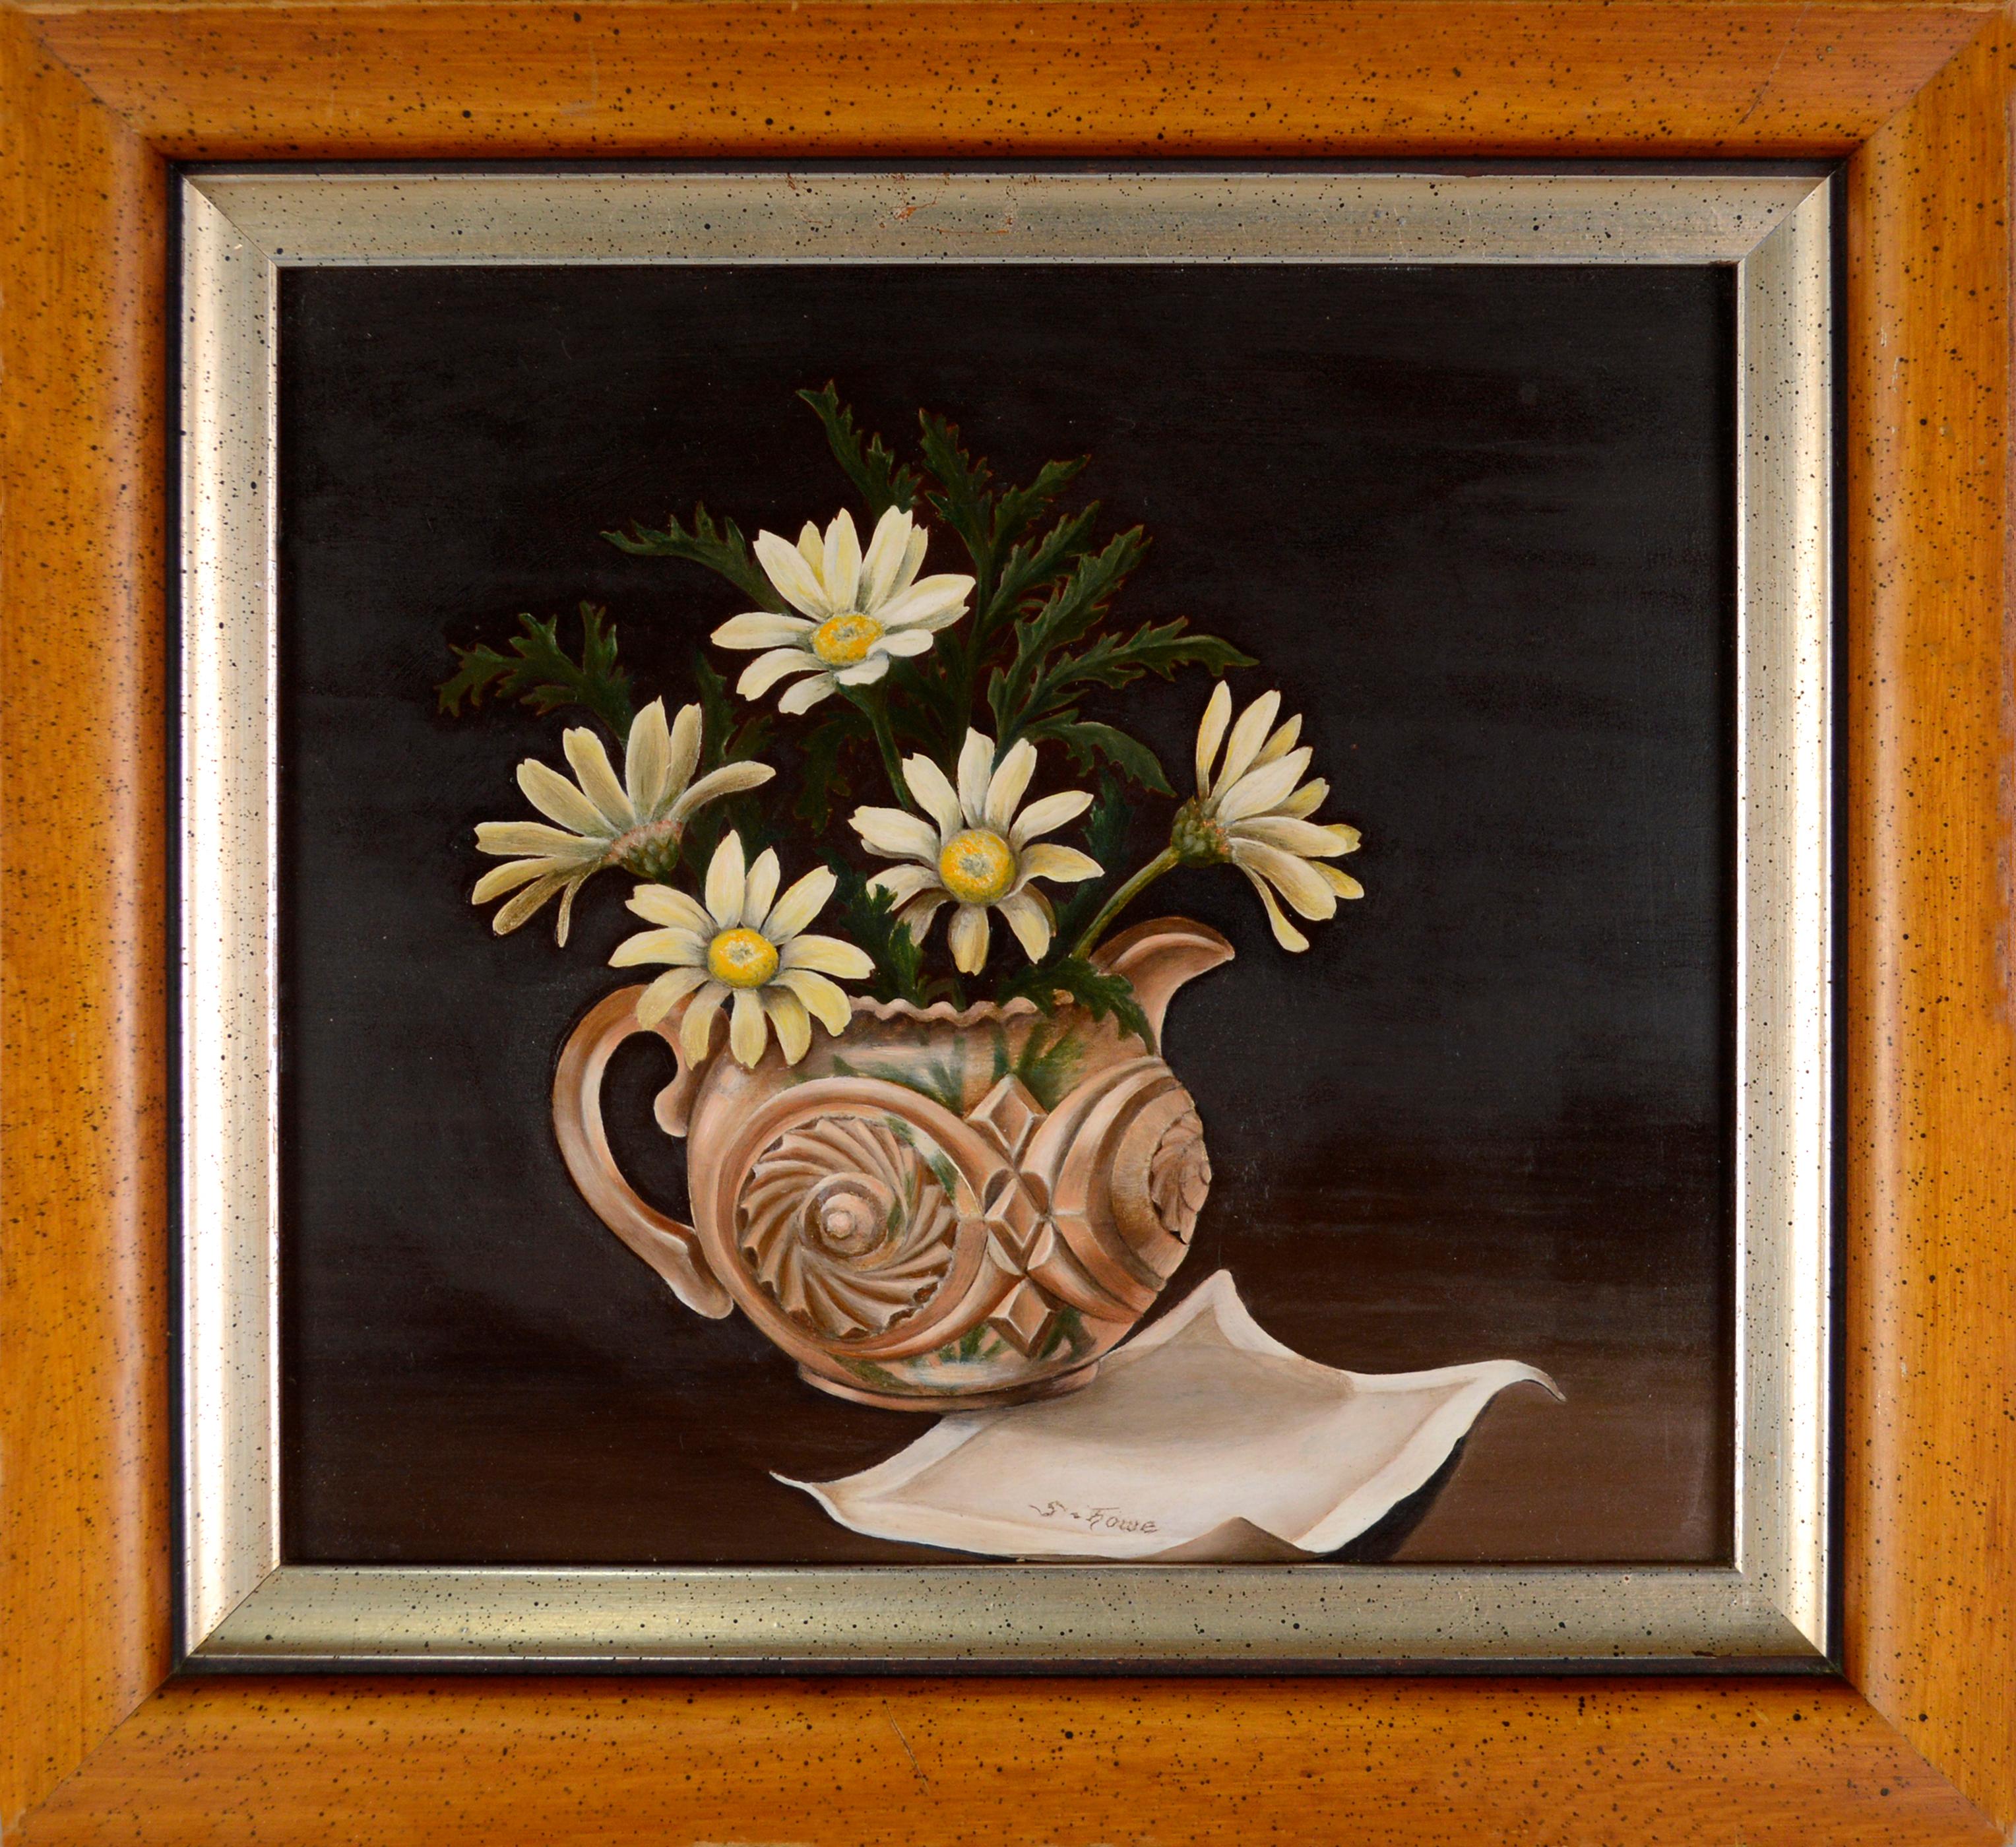 S. Howe Still-Life Painting - 1930s Floral Still-Life with Daisies and Cut Crystal Vase